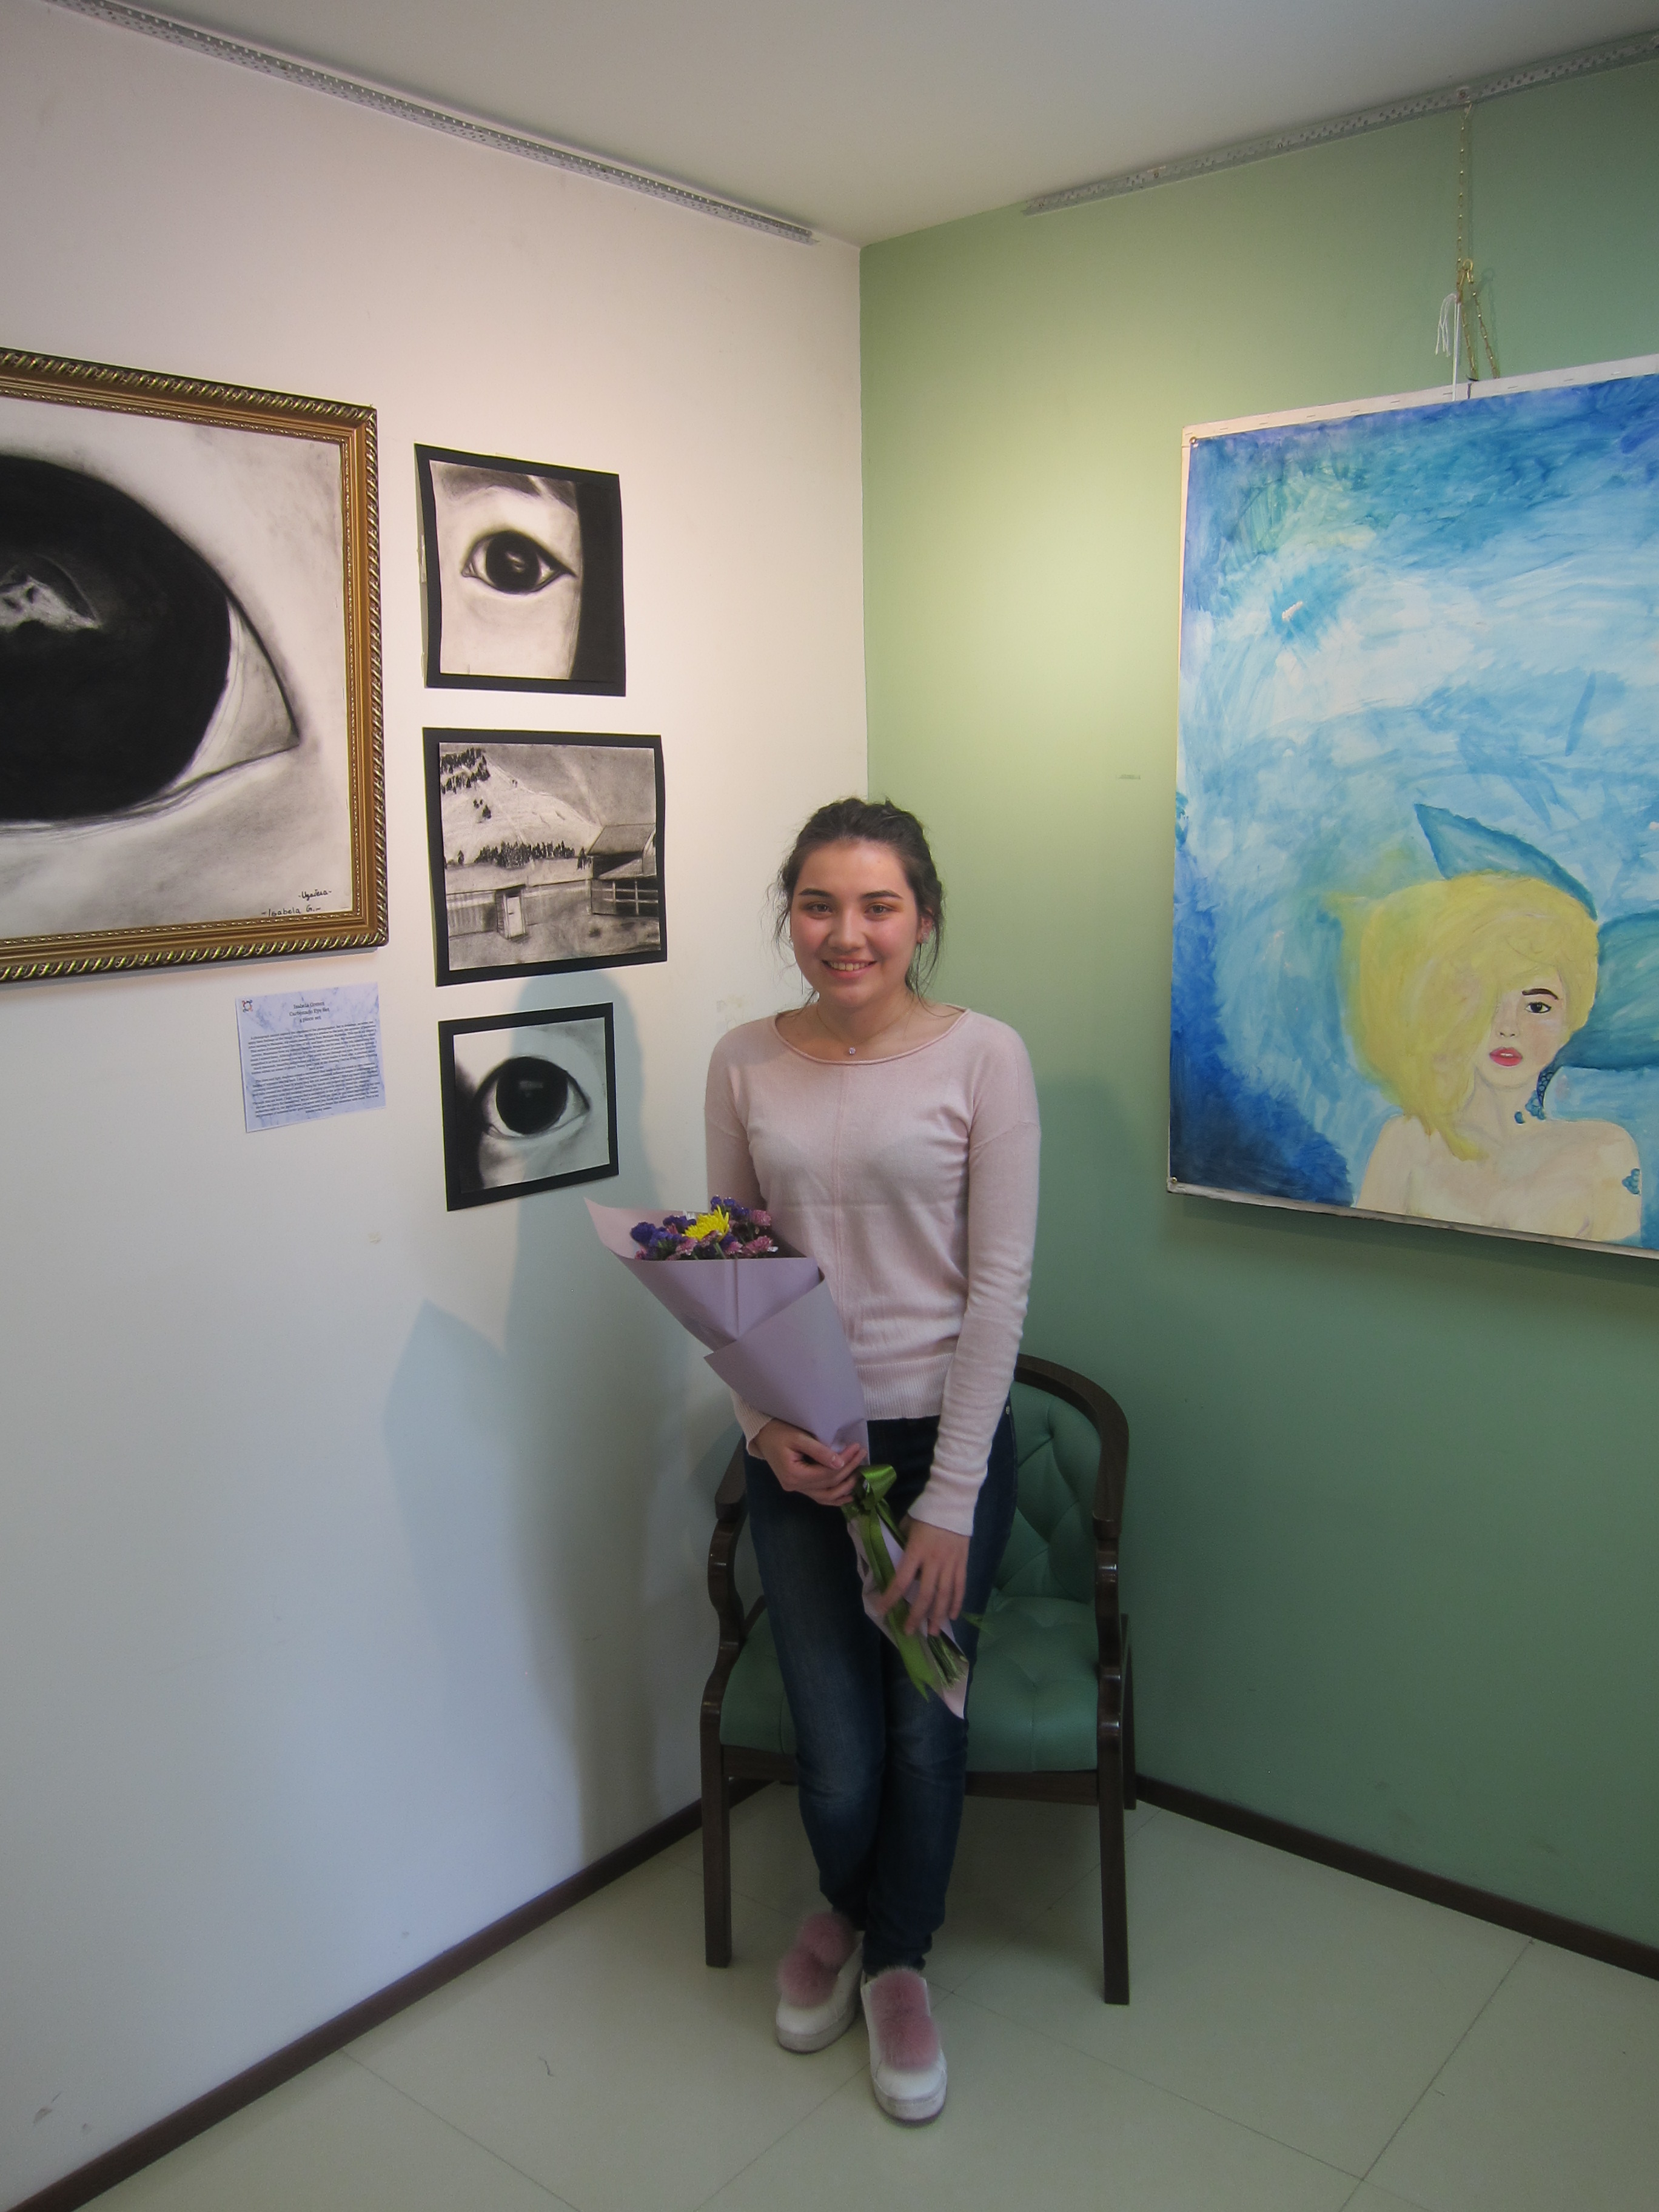 ASU Hosted Art Show at Altan Khaan Gallery